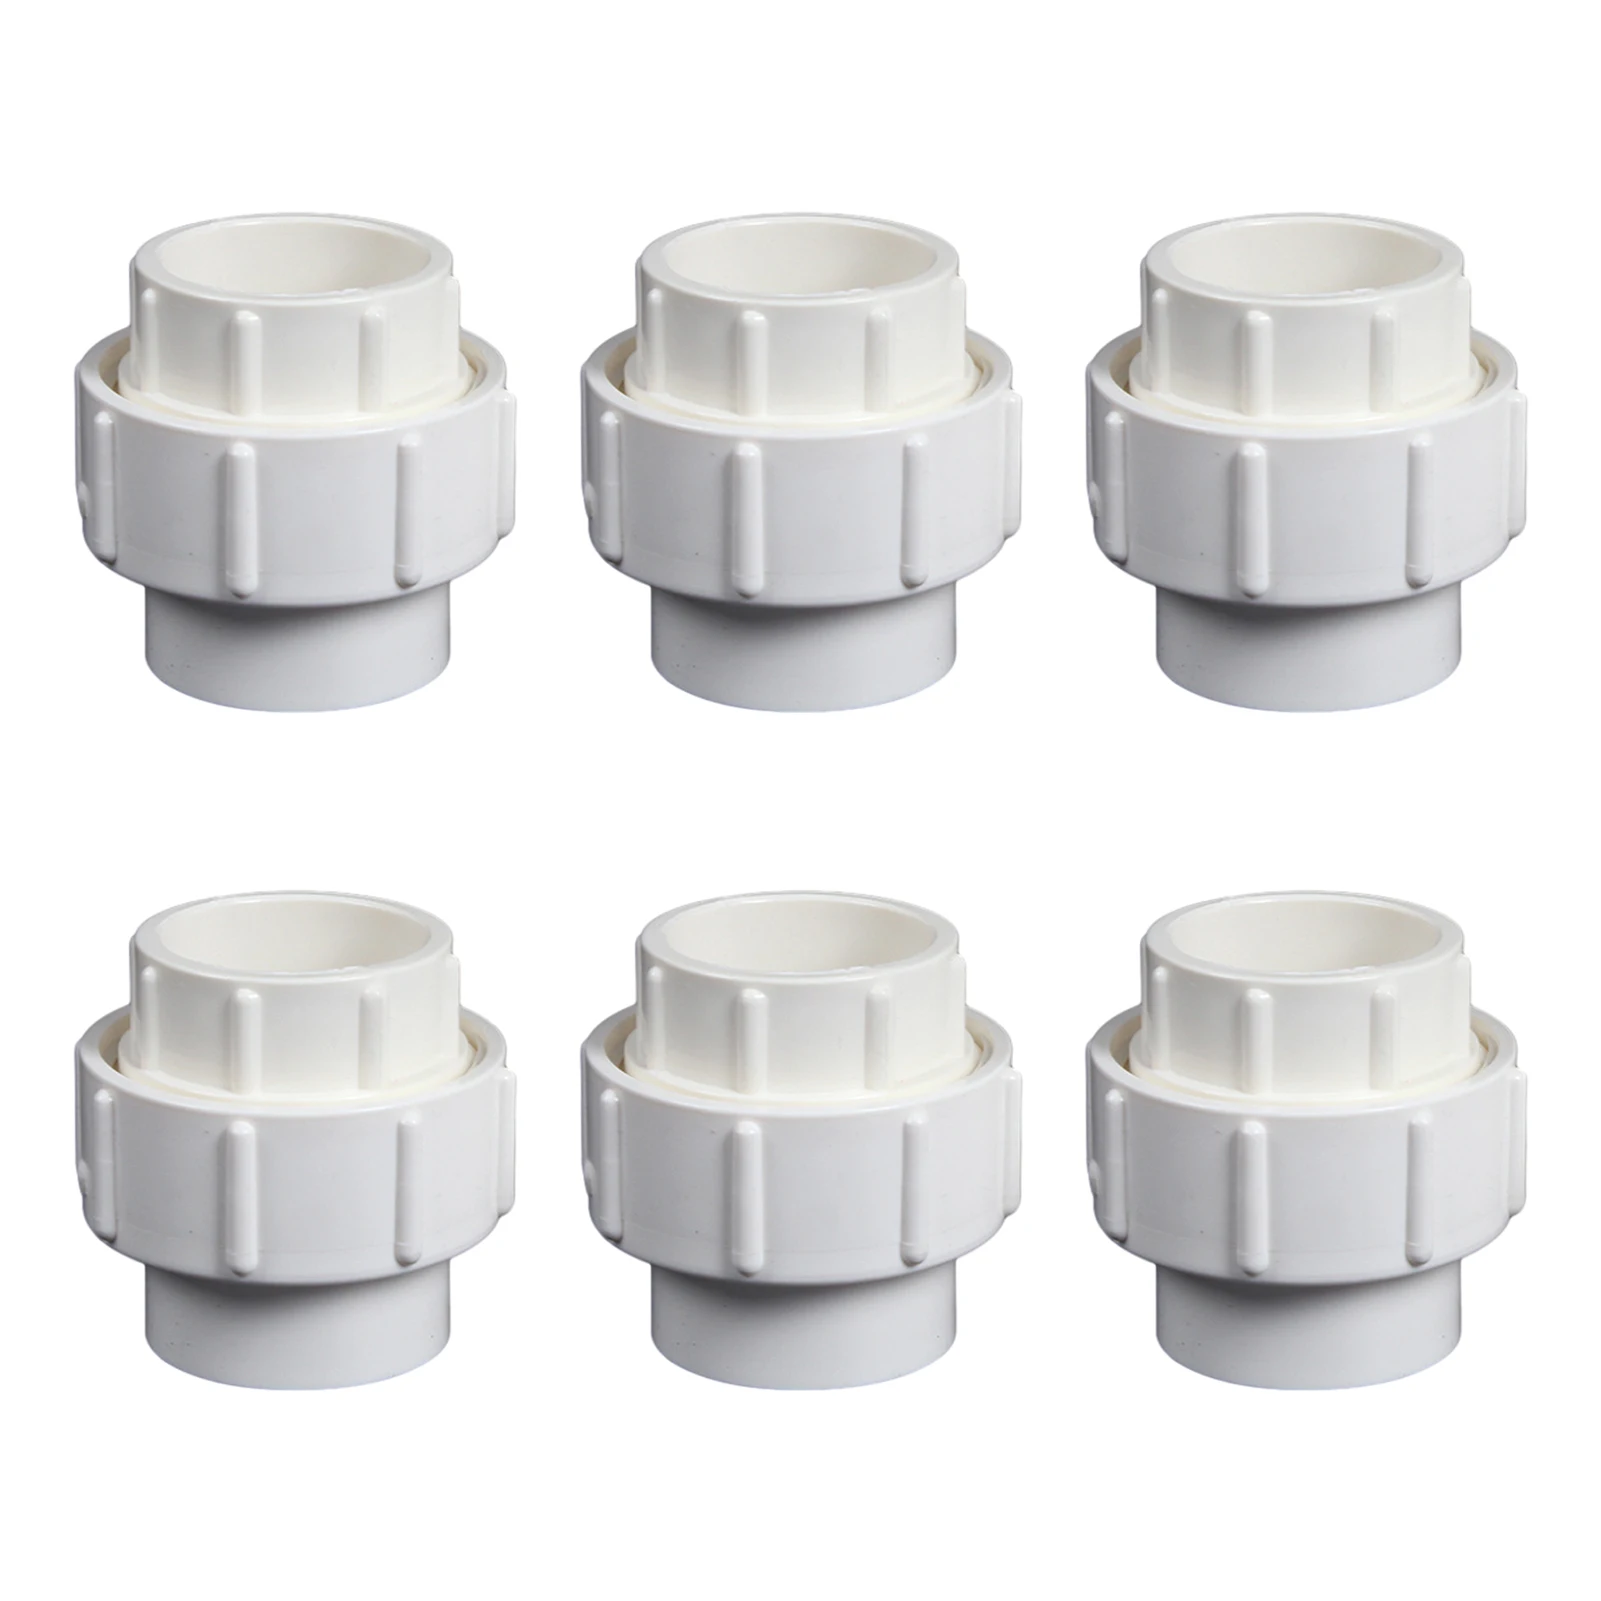 

6pcs Swimming Pools PVC Adapter Socket Connection Convenient Slip Union Garden Outdoor Applications Coupling Pipe Fitting Port